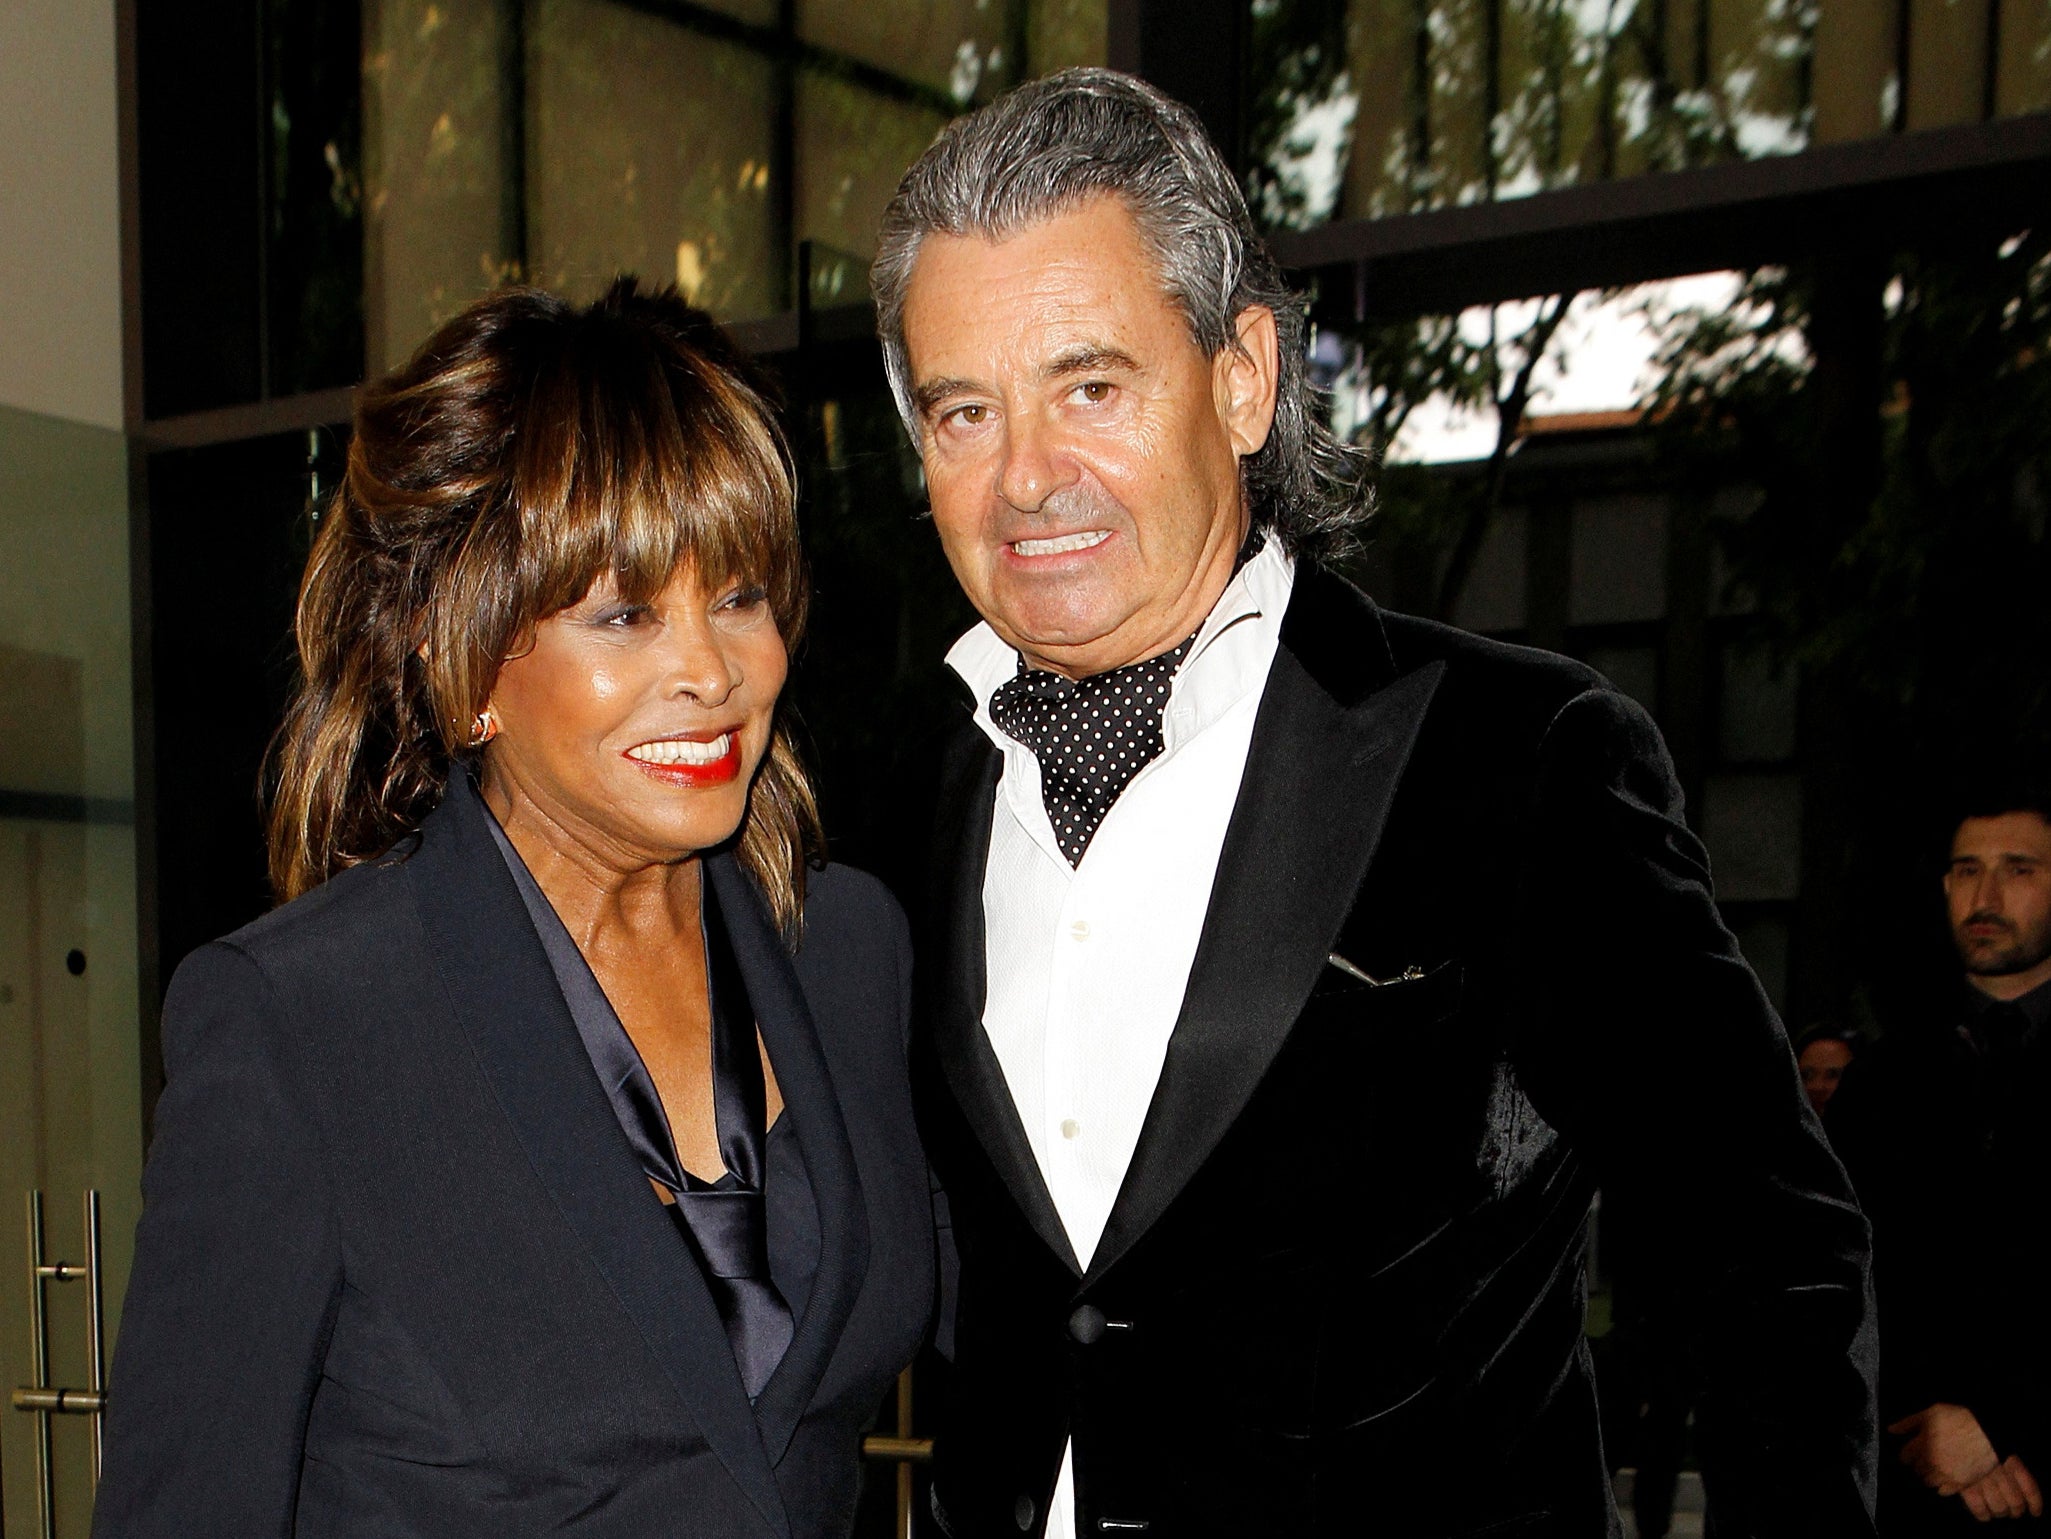 Tina Turner with her Erwin Bach in 2015